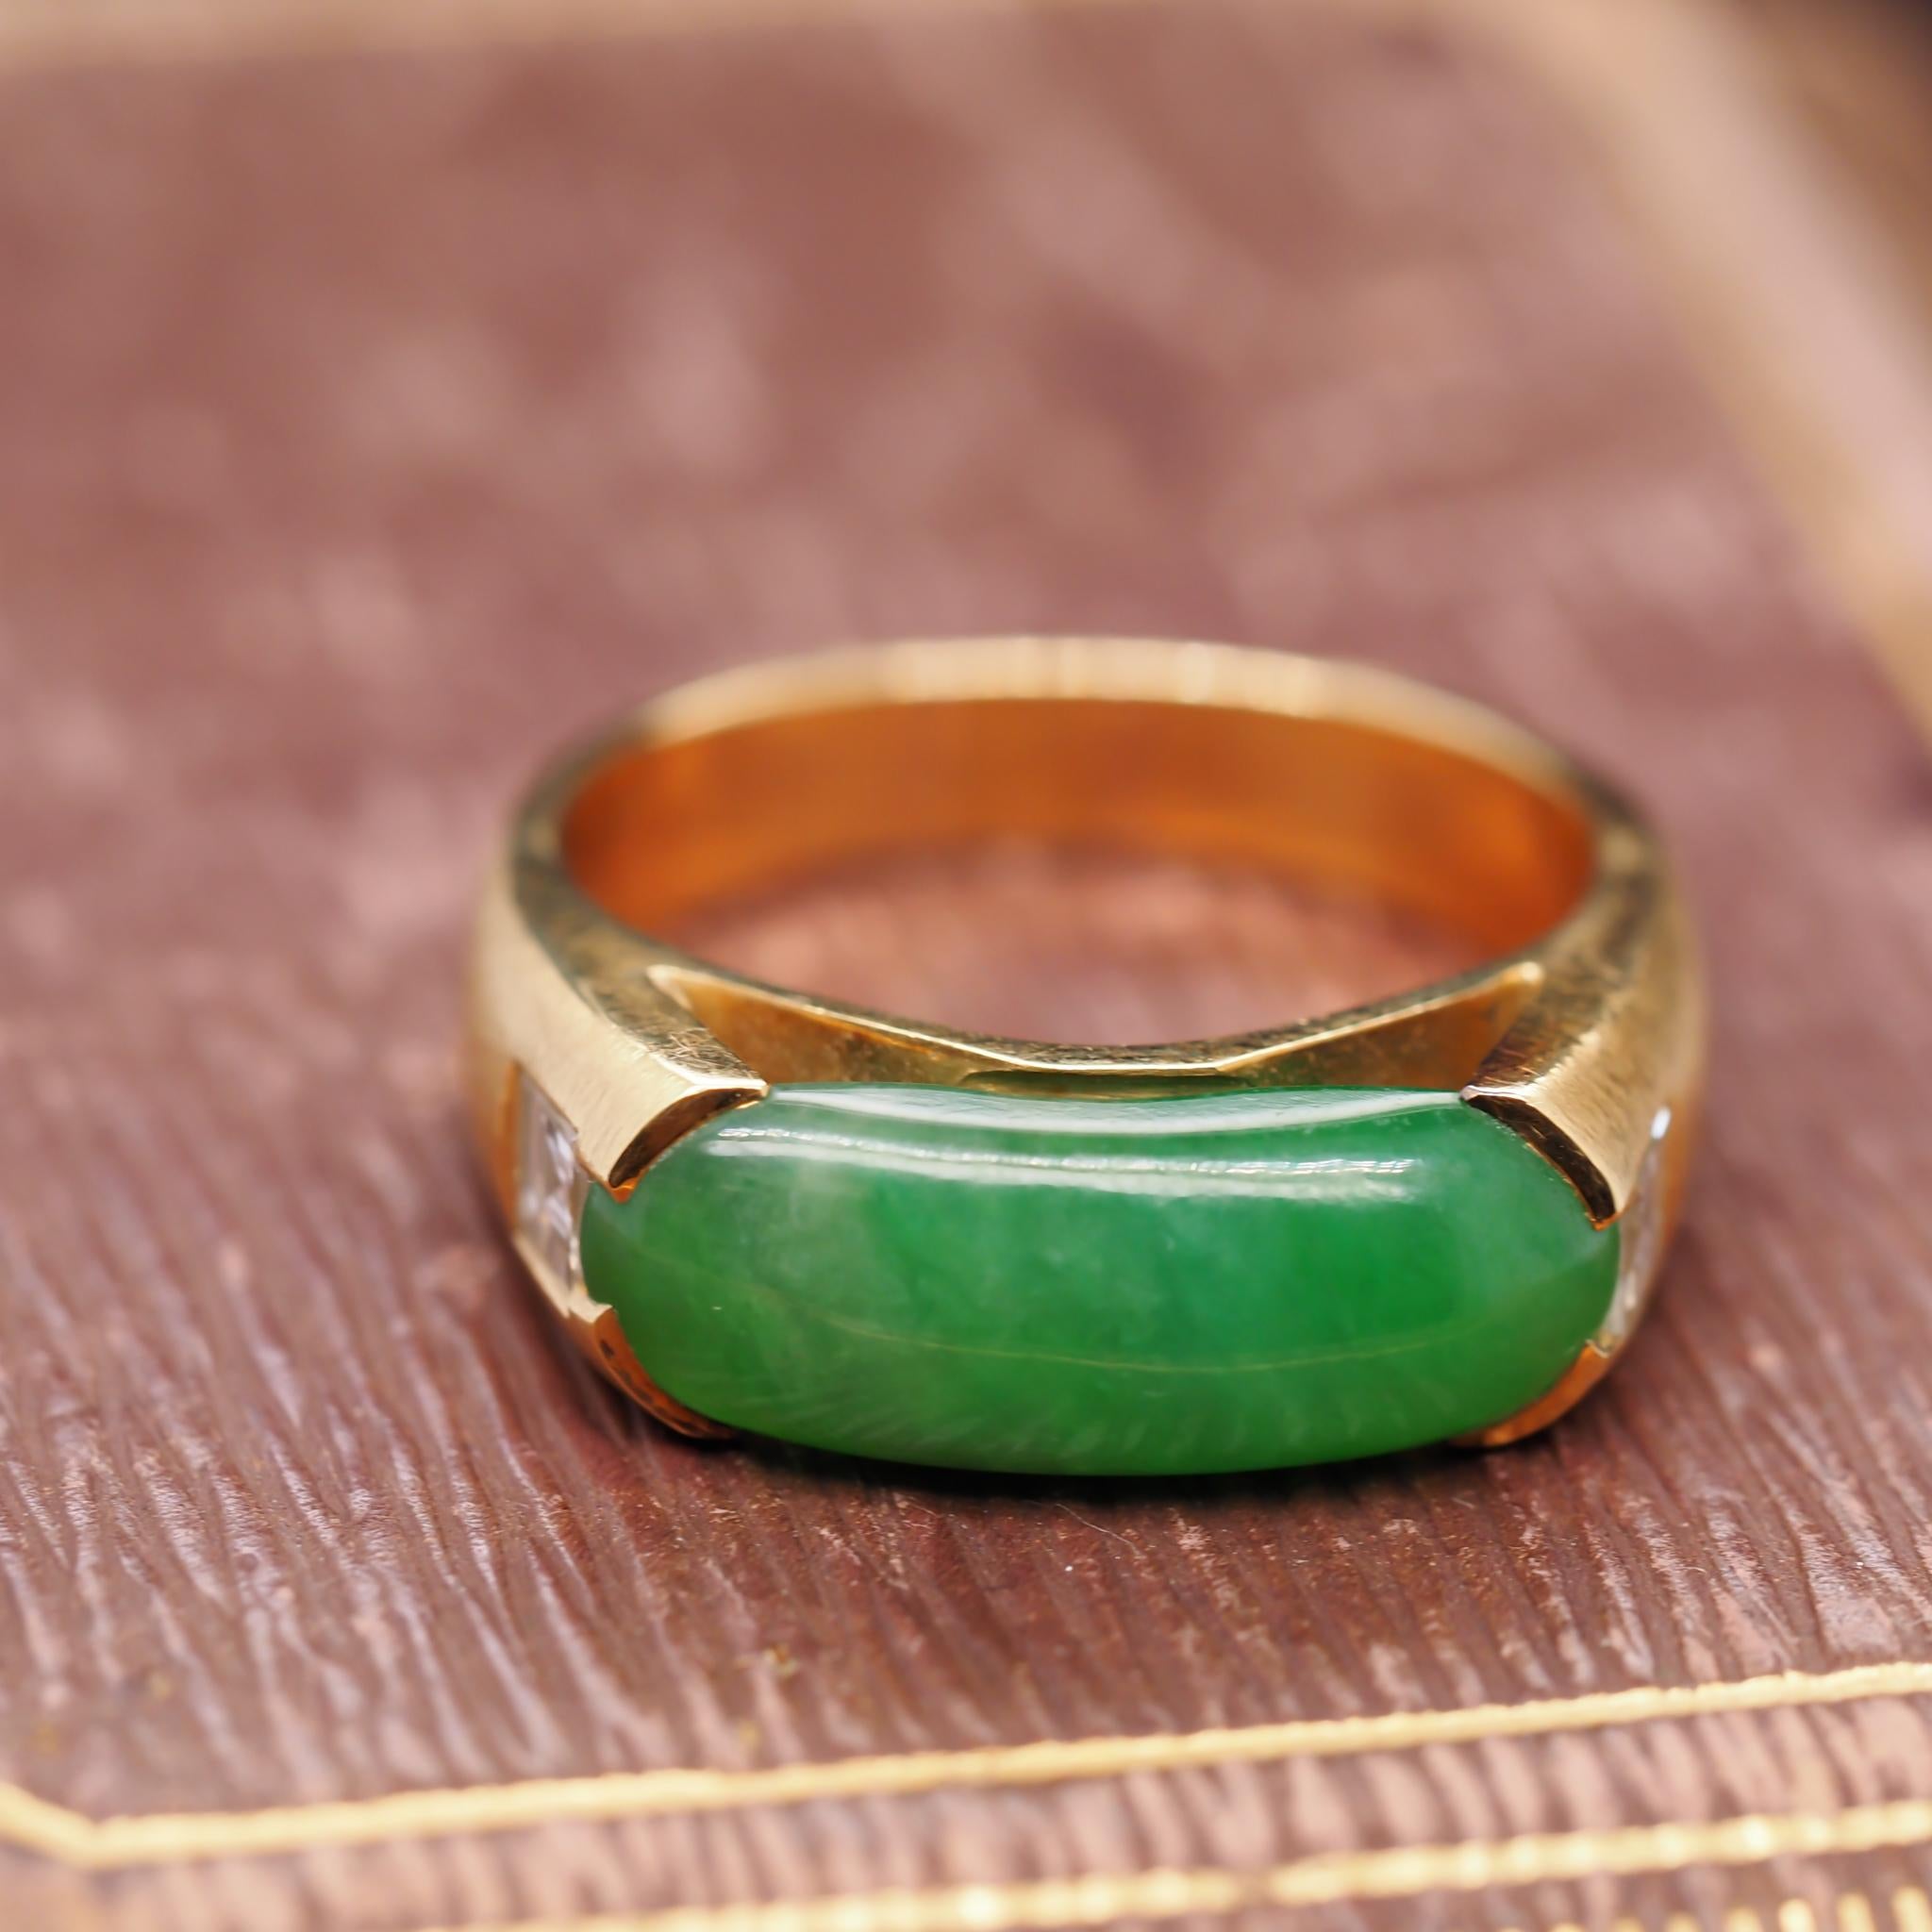 Ring Size: 10.5
Metal Type: 18K Yellow Gold  [Hallmarked, and Tested]
Weight:  12.3 grams

Diamond Details: .80ct, total weight. Natural Diamonds, Carre Cut, E Color, VS Clarity

Center Stone Details: Jade, Oval Cabochon, Natural Green. Measures